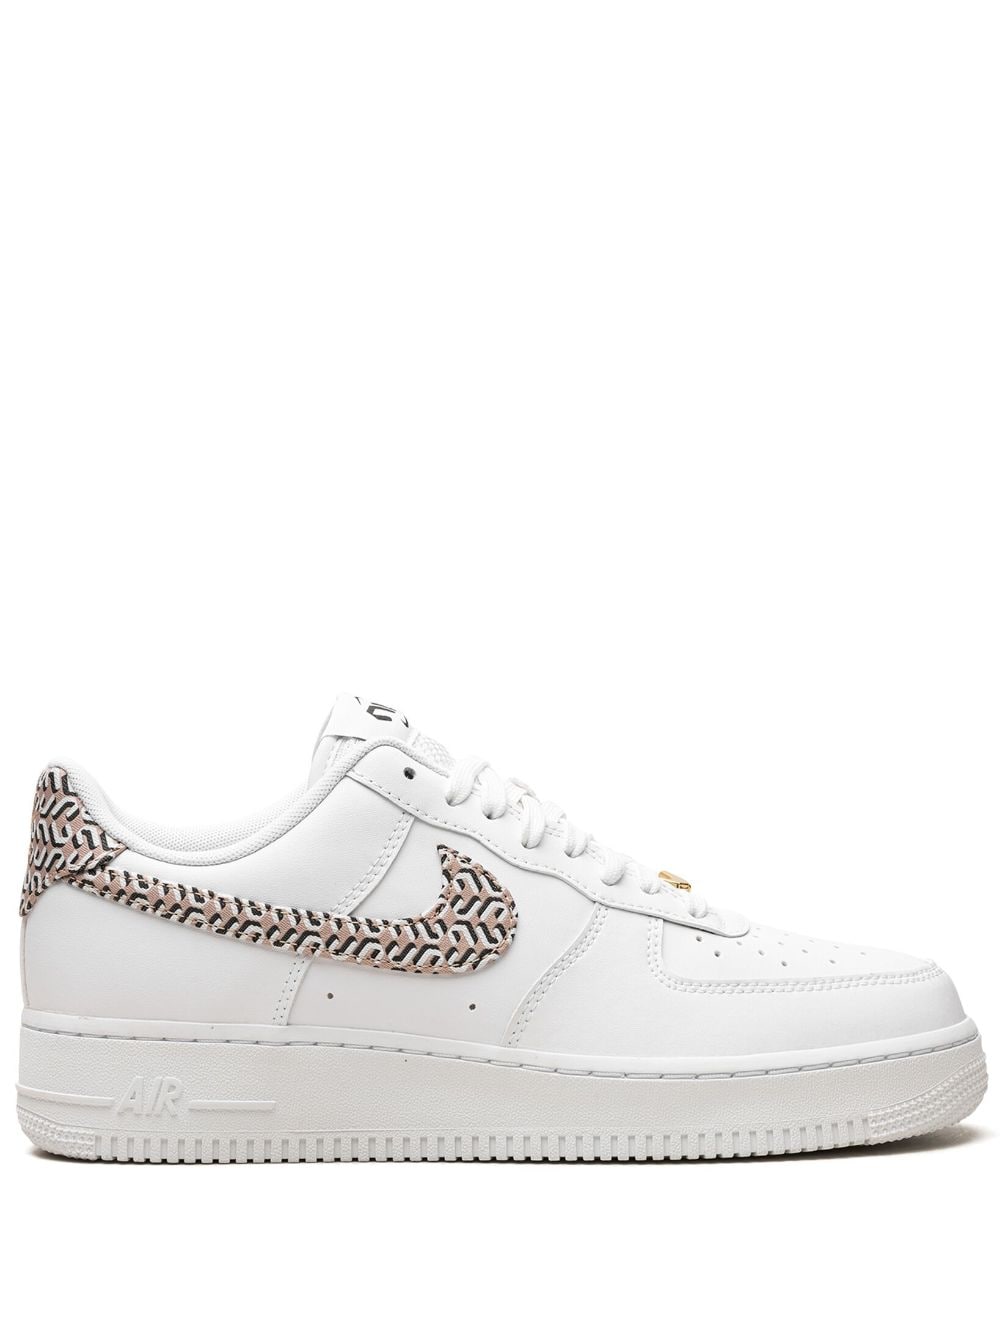 Shop Nike Air Force 1 Low "united In Victory In White